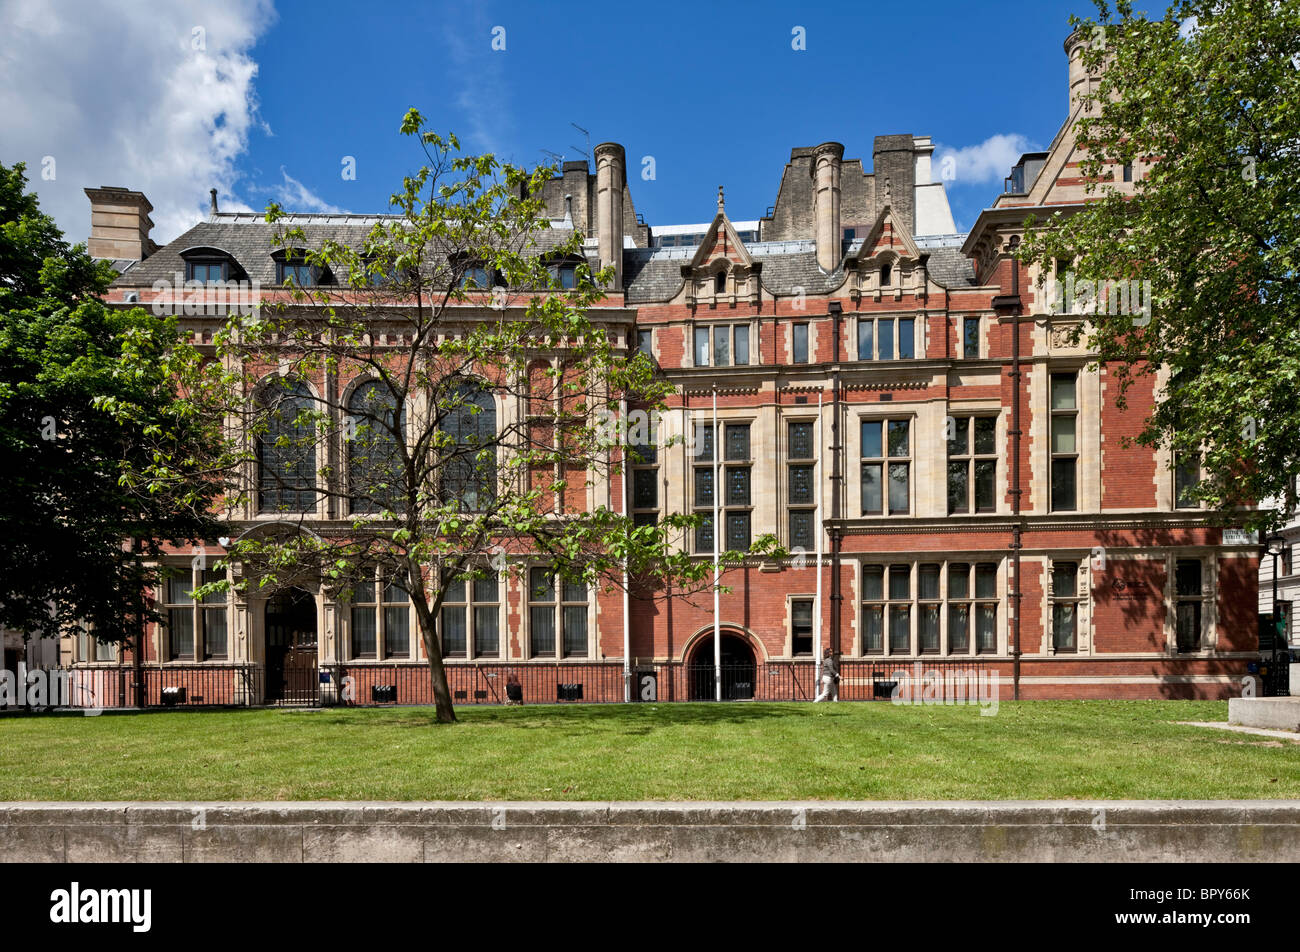 Royal Institution of Chartered Surveyors (RICS) Sede presso la piazza del Parlamento, Westminster, London. Foto Stock